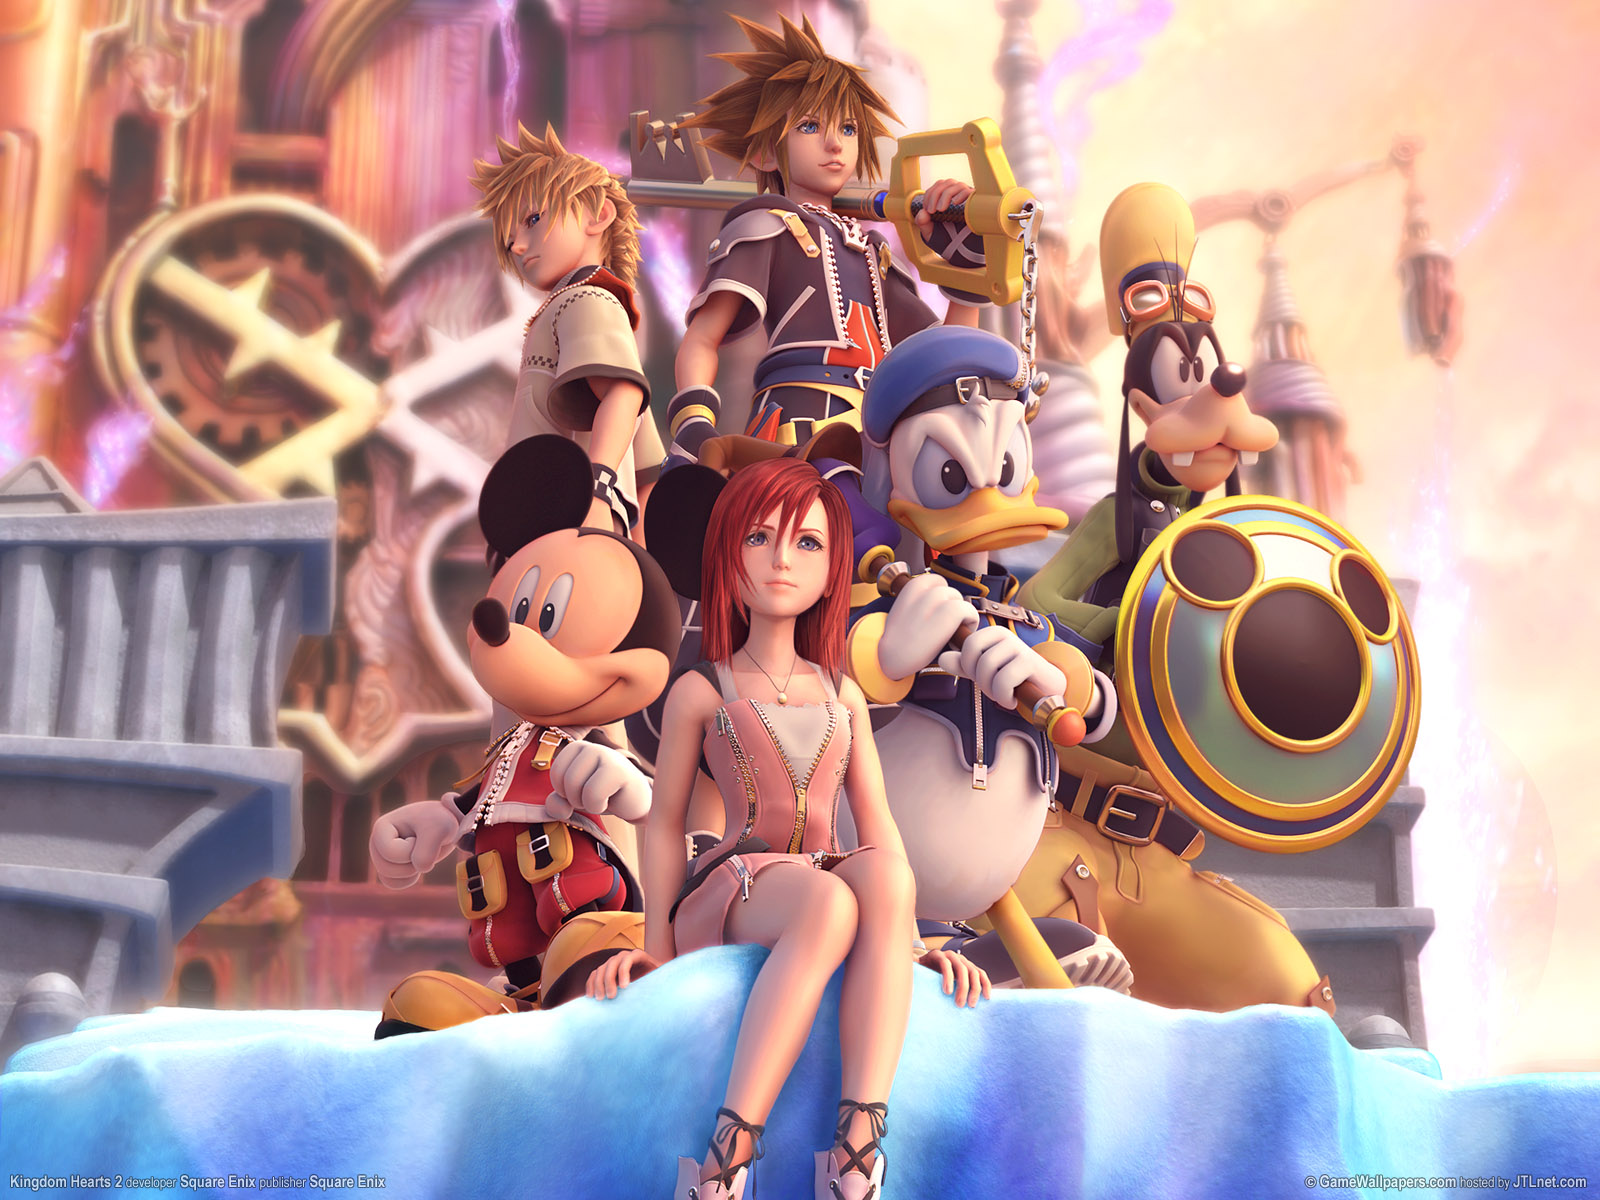 Home Browse All Kingdom Hearts Gang